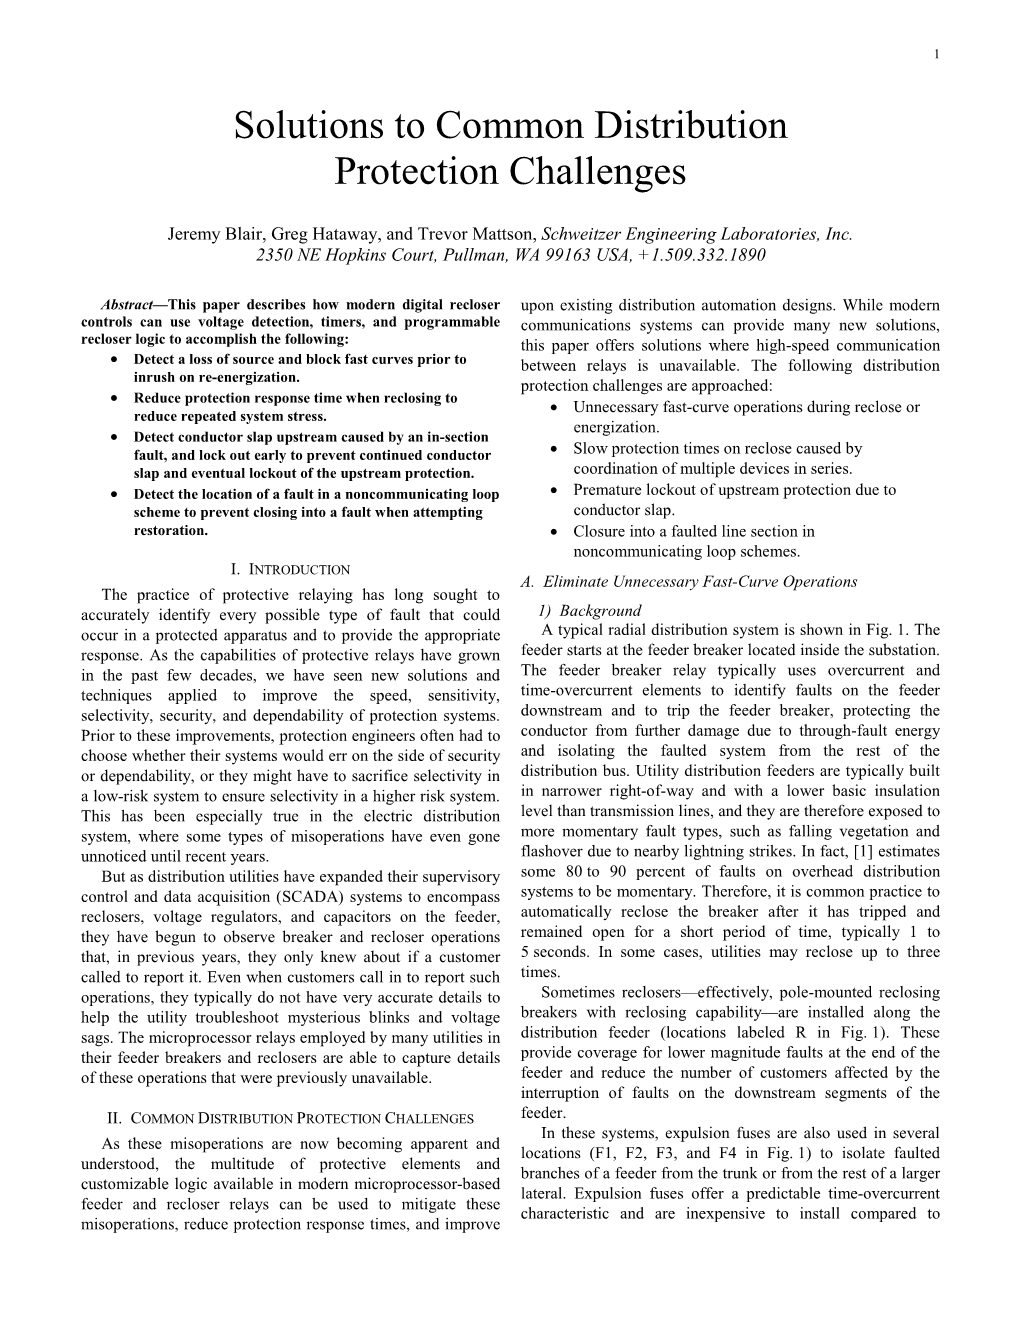 Solutions to Common Distribution Protection Challenges